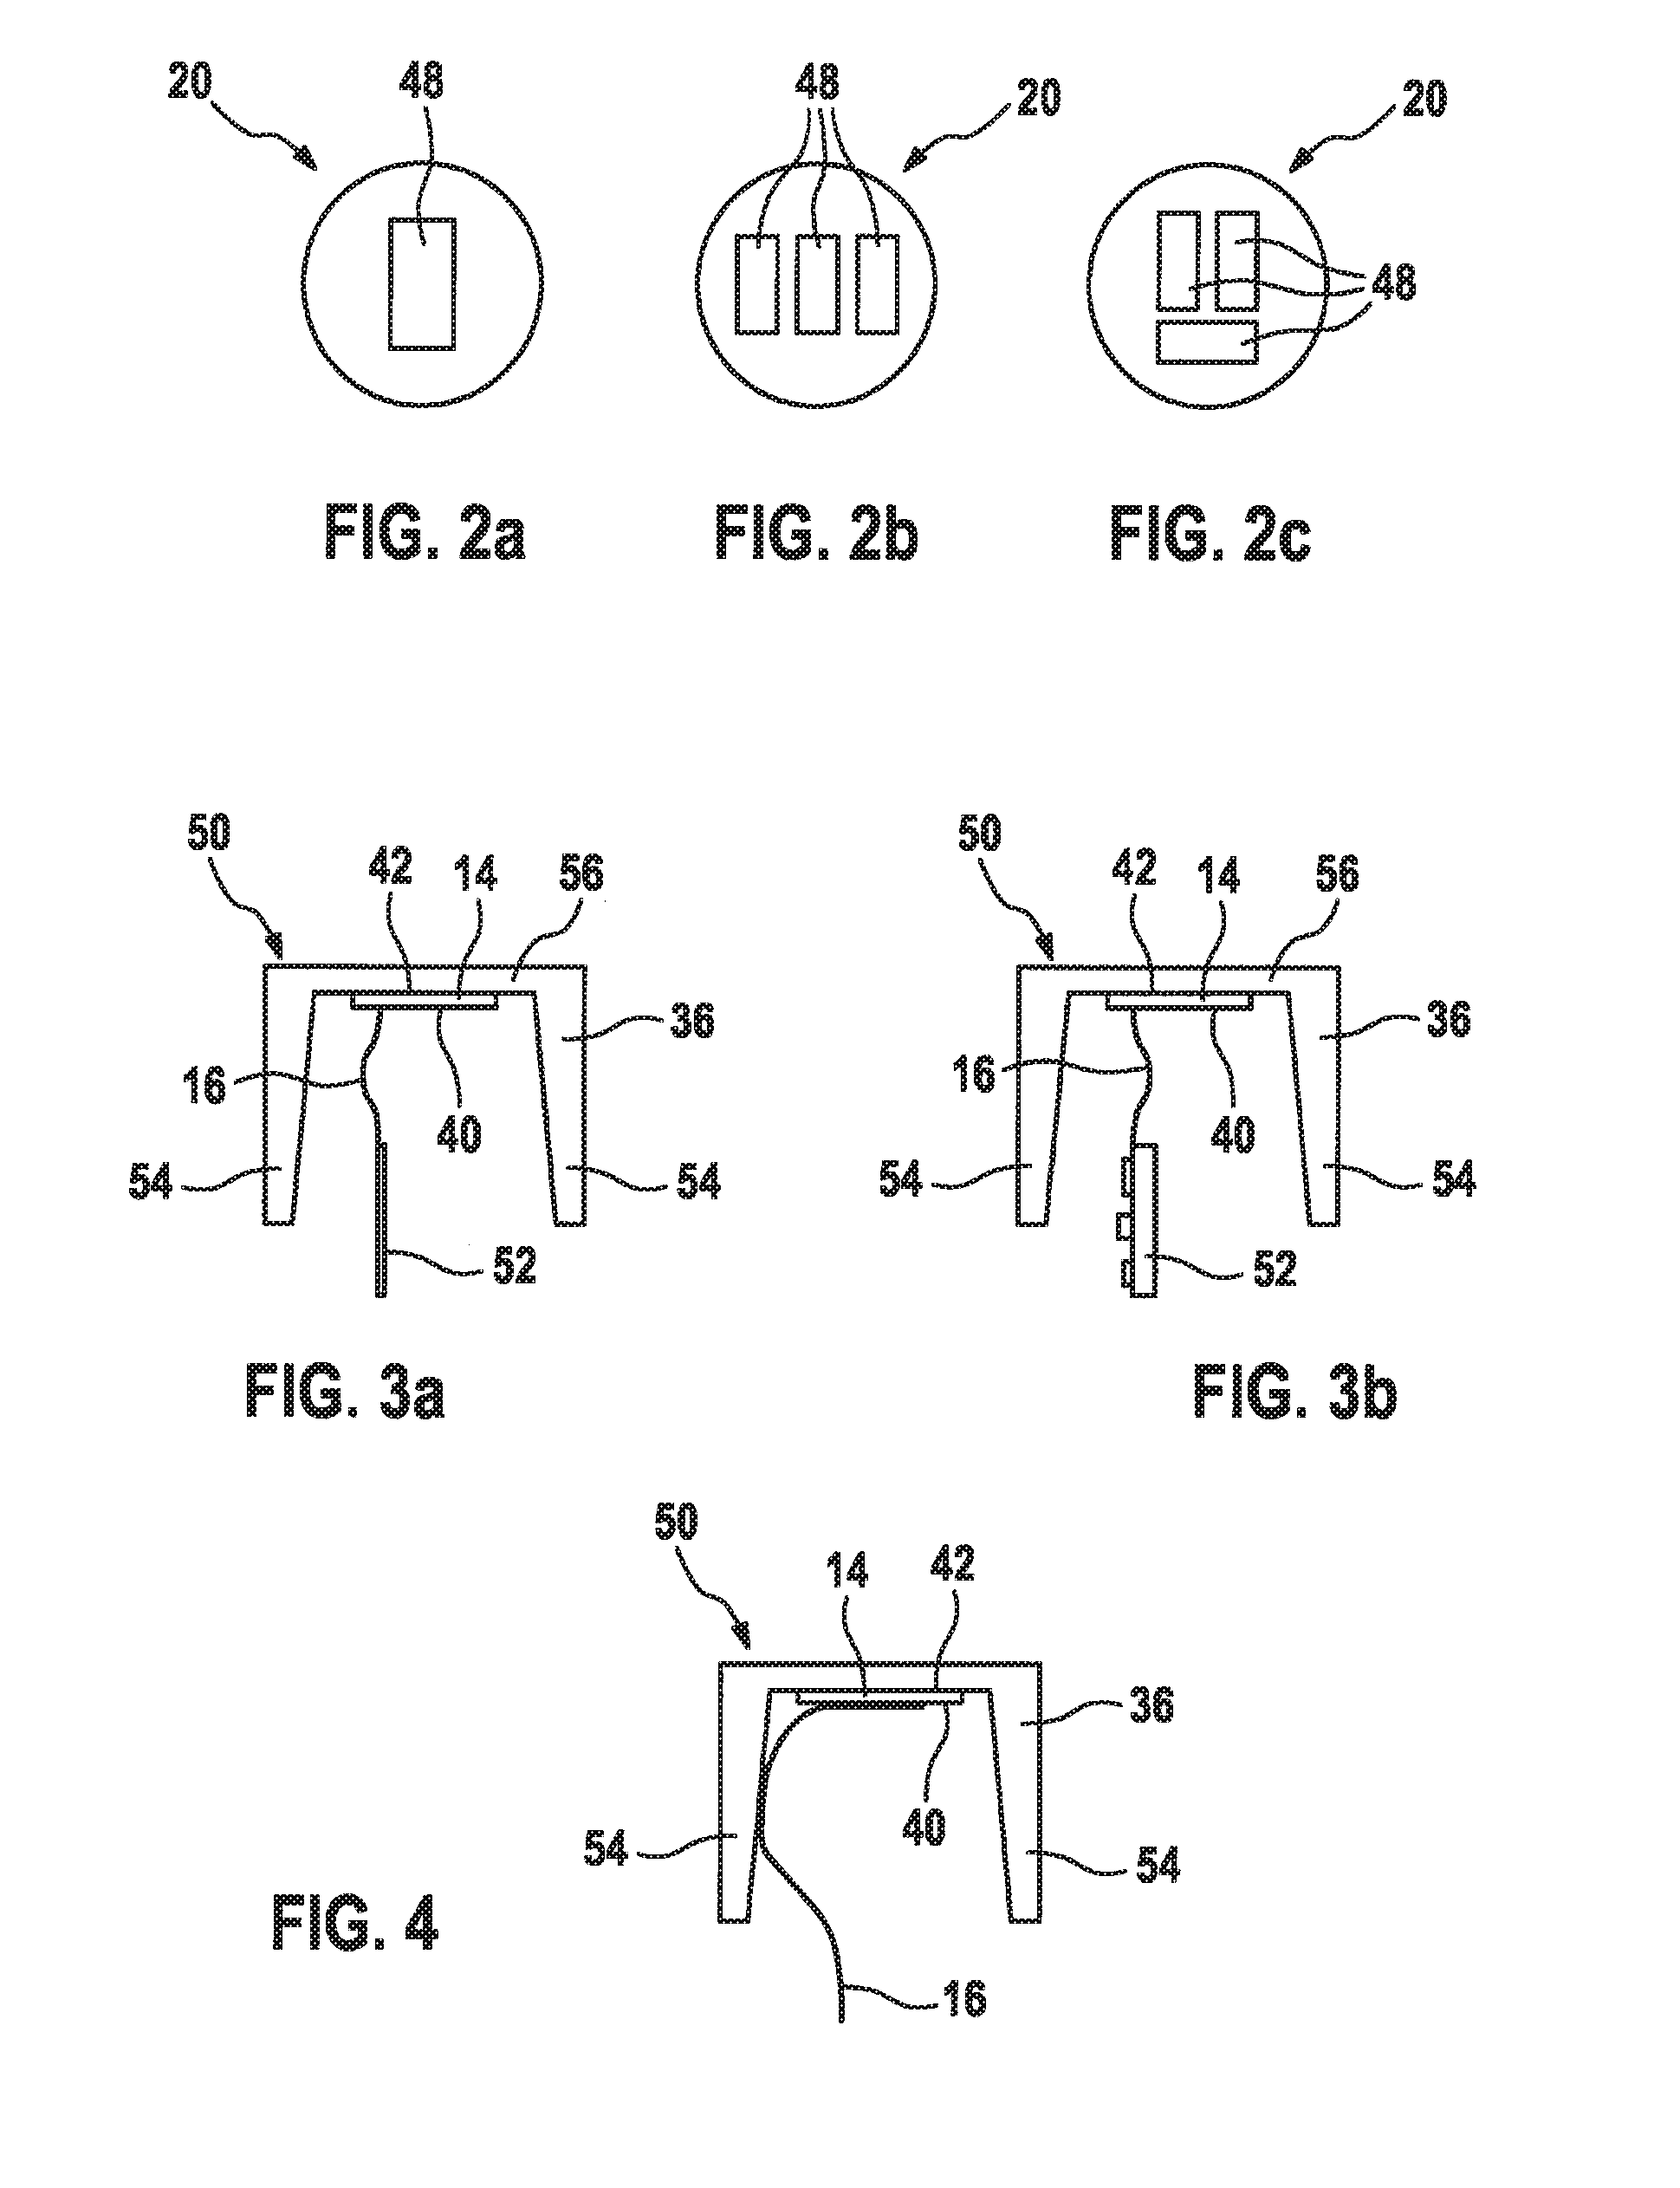 Method for electrically contacting a piezoelectric ceramic